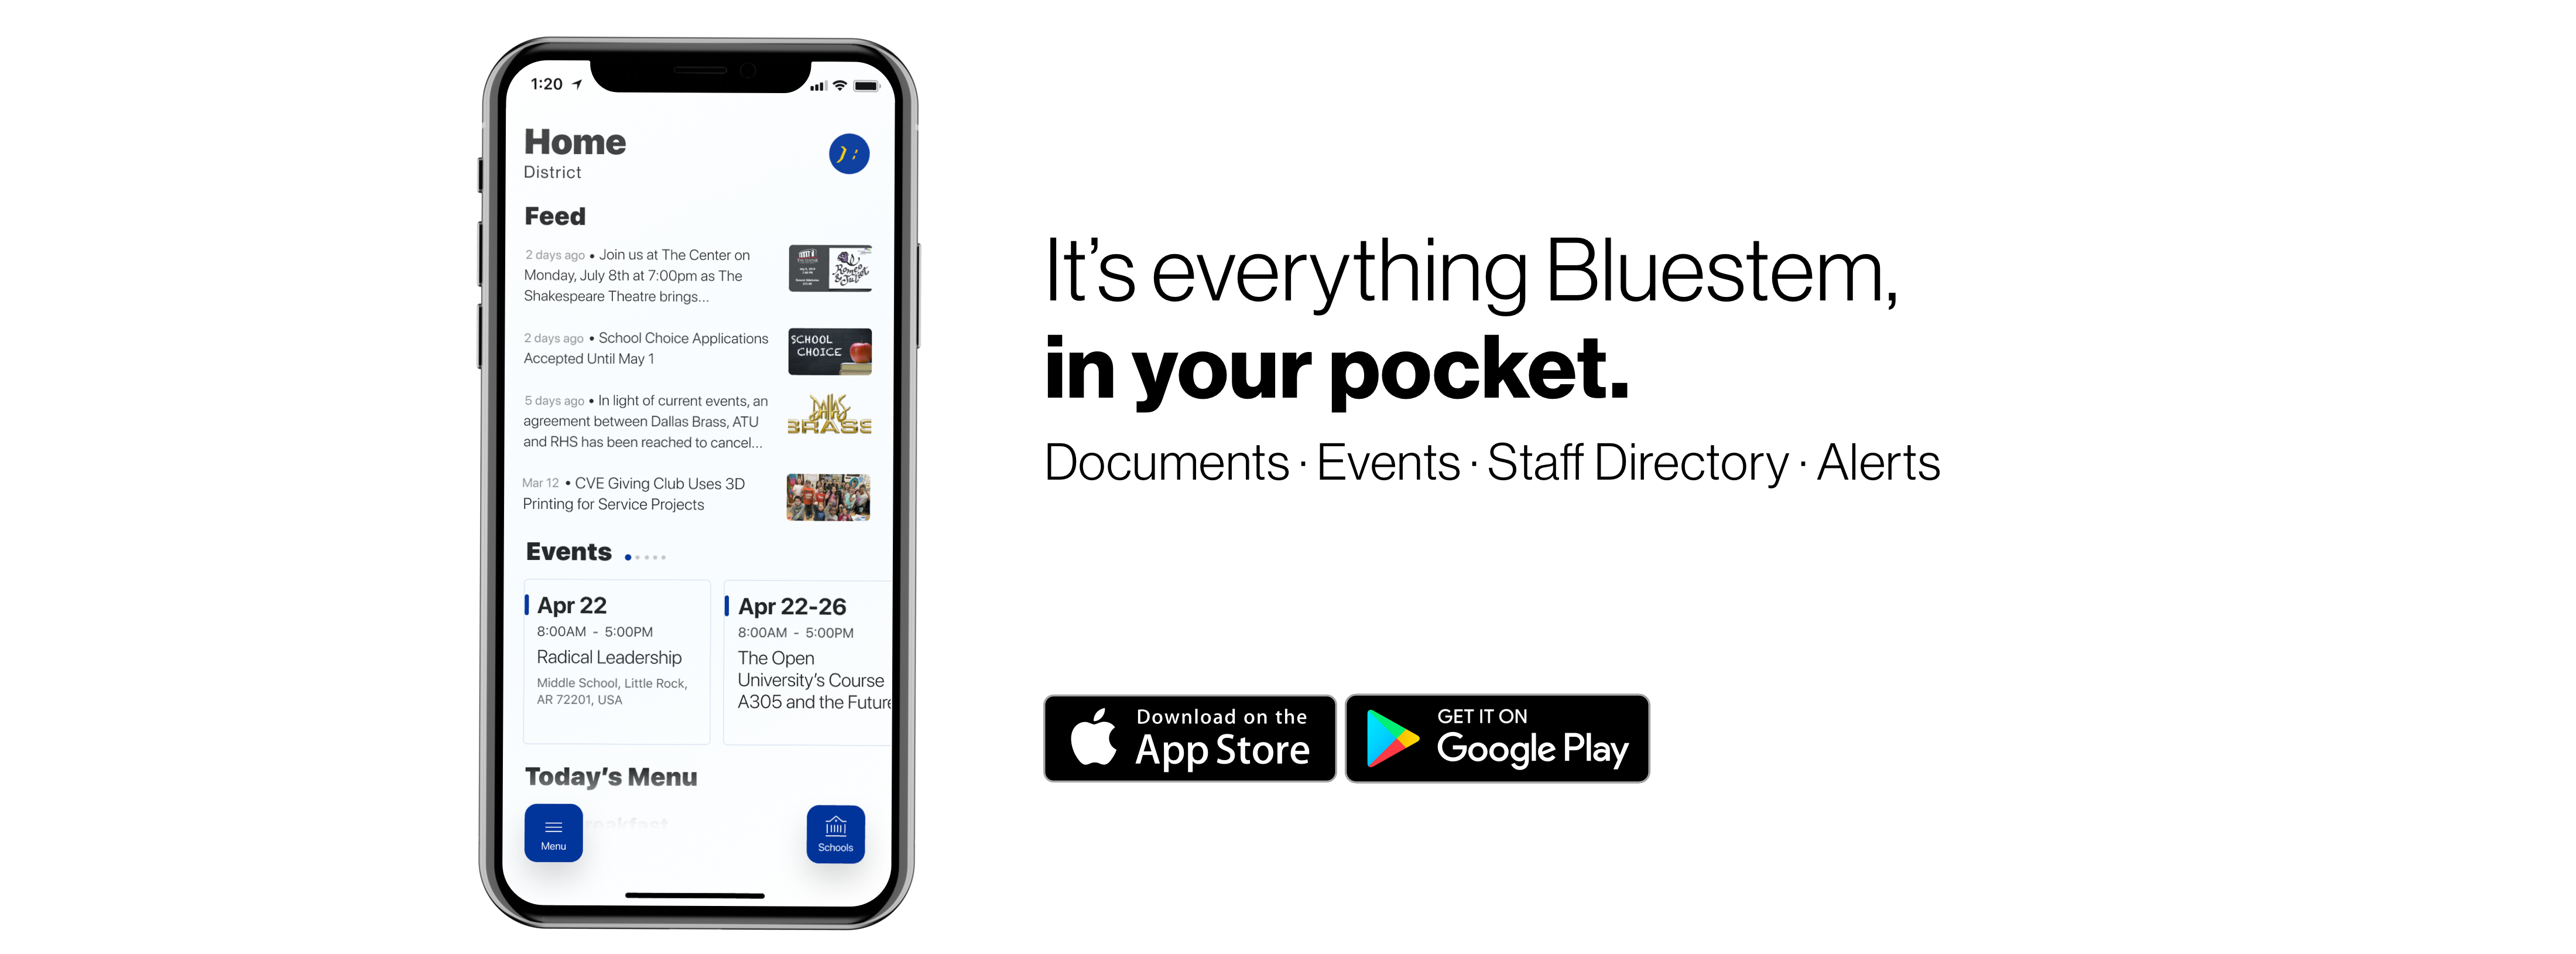 Everything Bluestem, in your pocket. Cafeteria Menus, Events, Staff Directory, Alerts, Athletics